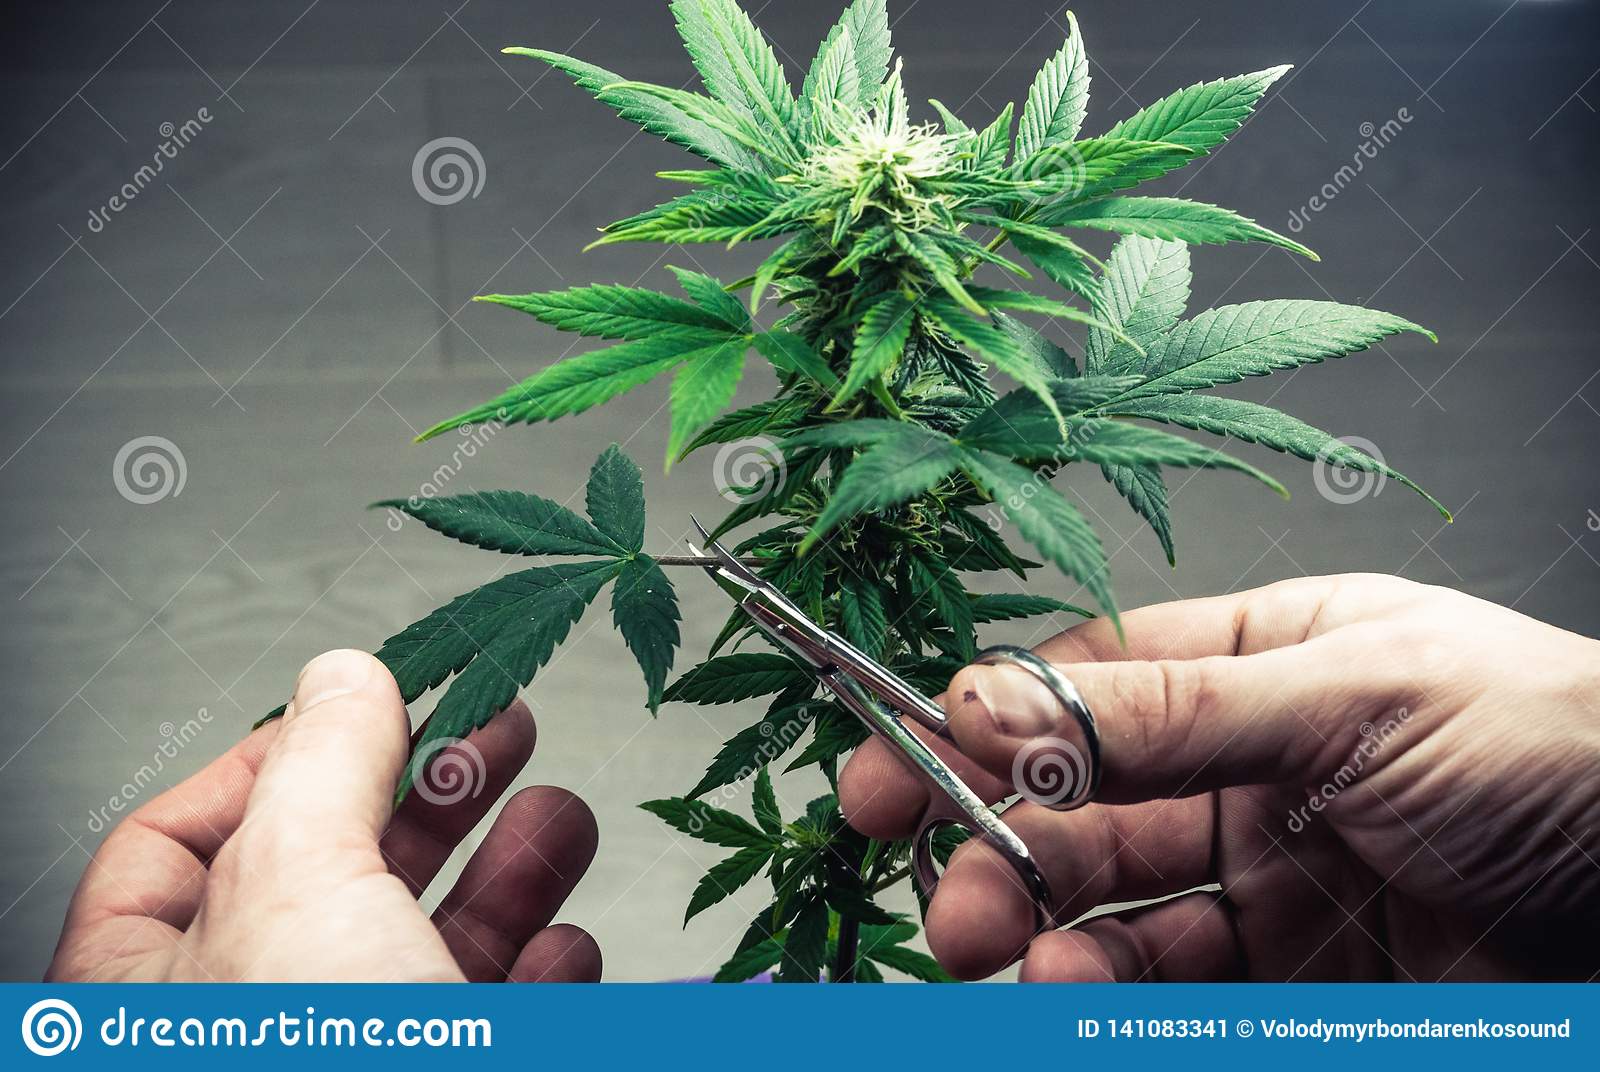 person-trimming-leaves-medical-marijuana-plant-close-up-cannabis-plant-growing-indoor-person-t...jpg